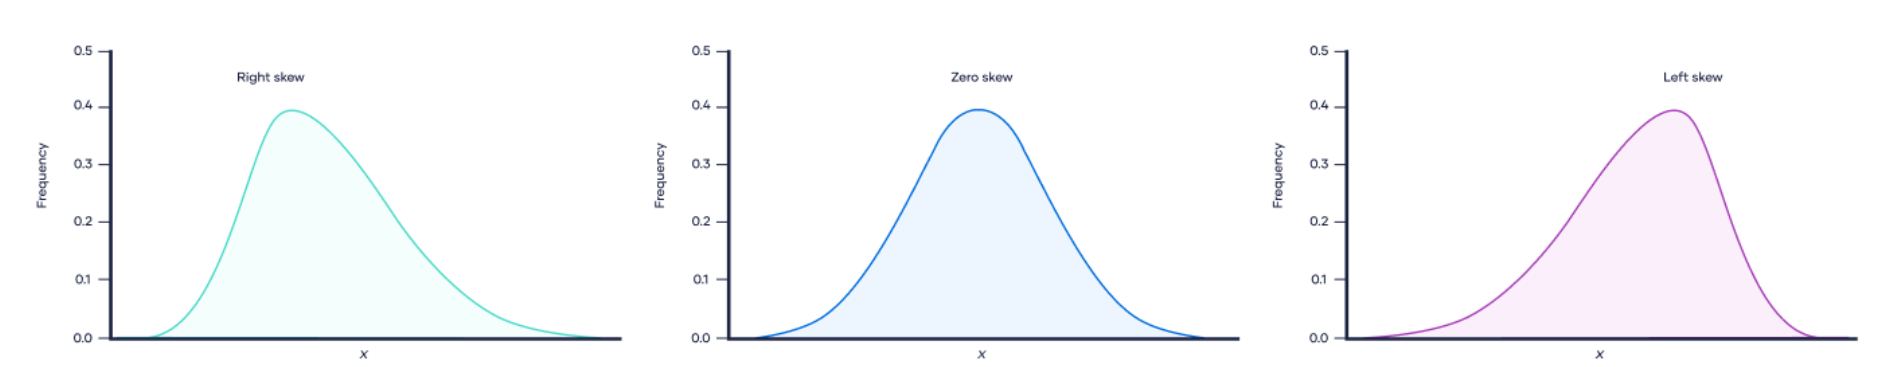 zero and negative and positive skew